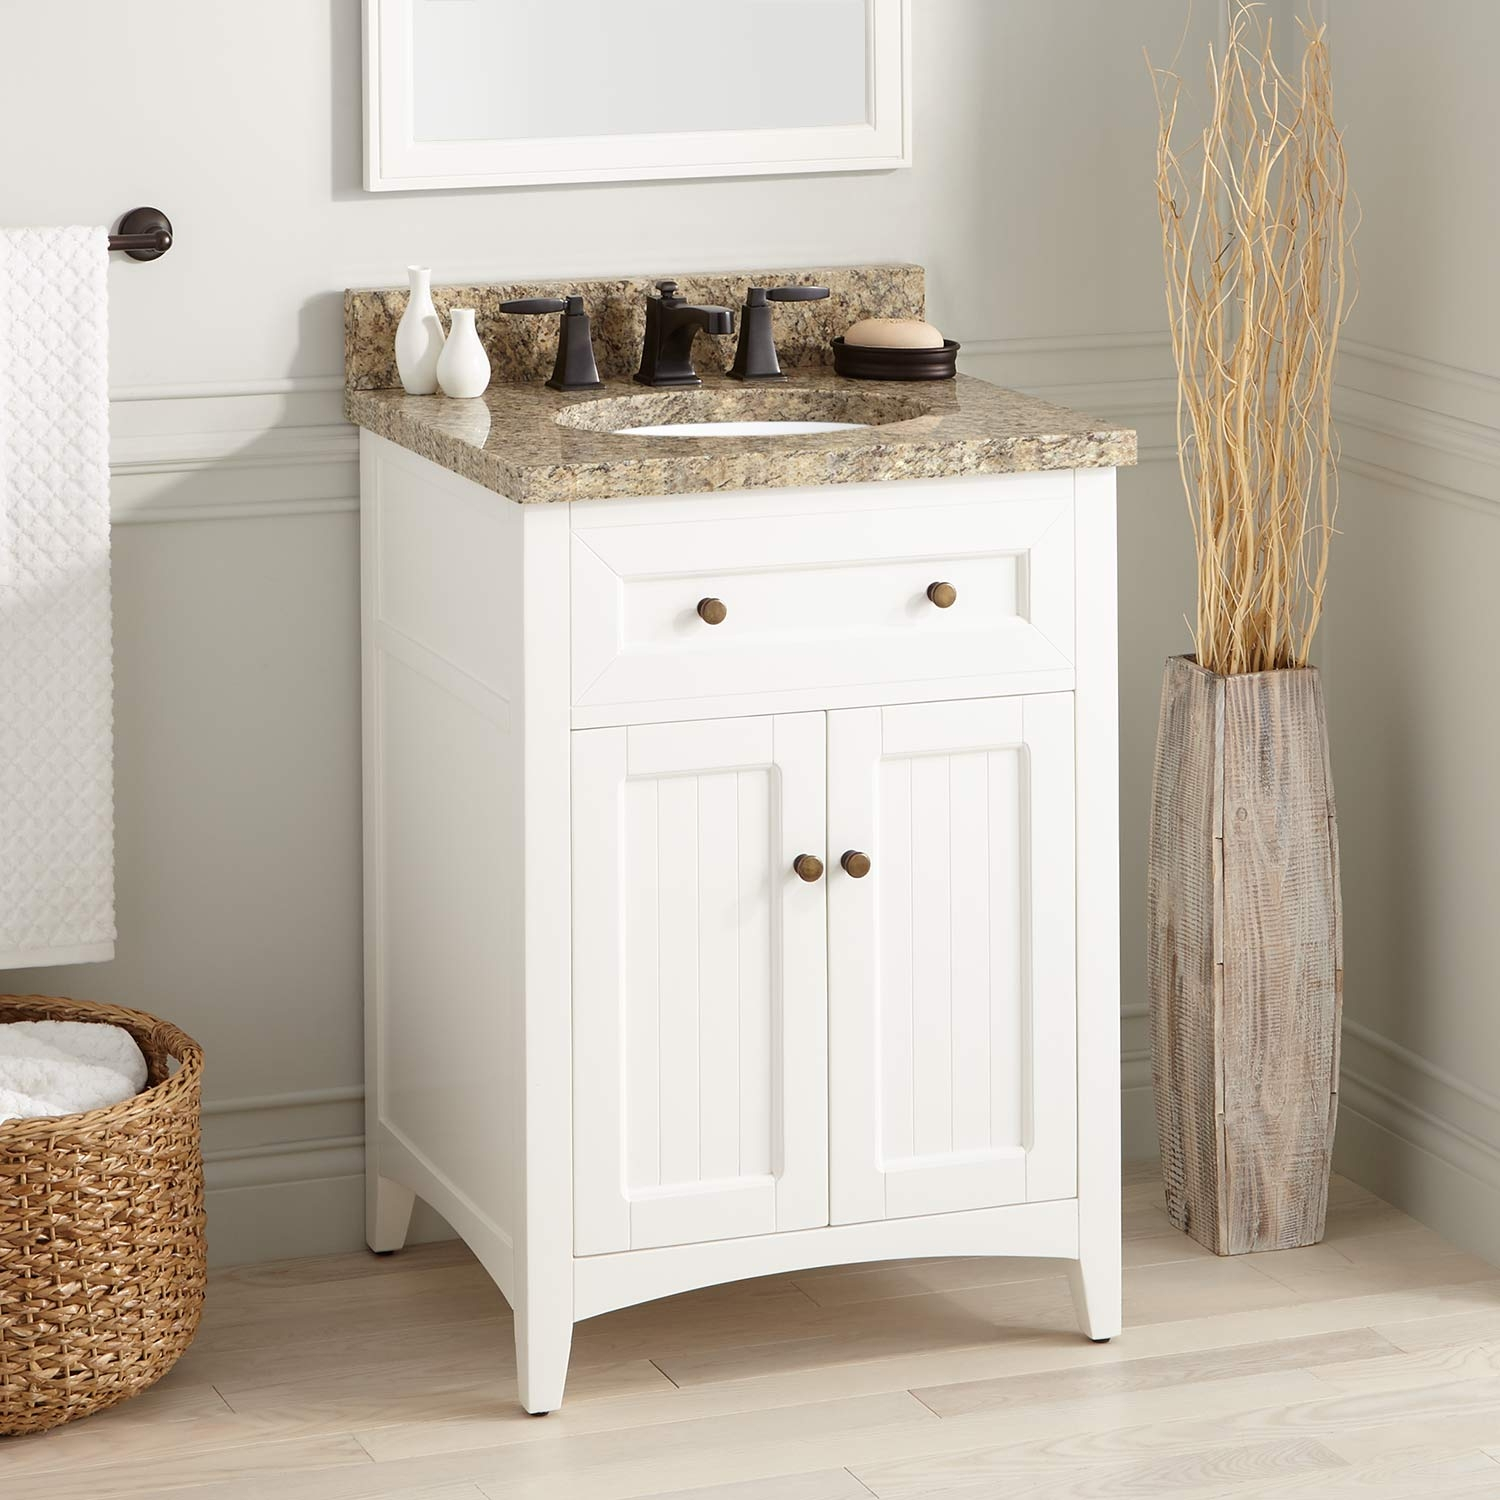 Wood Small Bathroom Vanity Signature Hardware with size 1500 X 1500